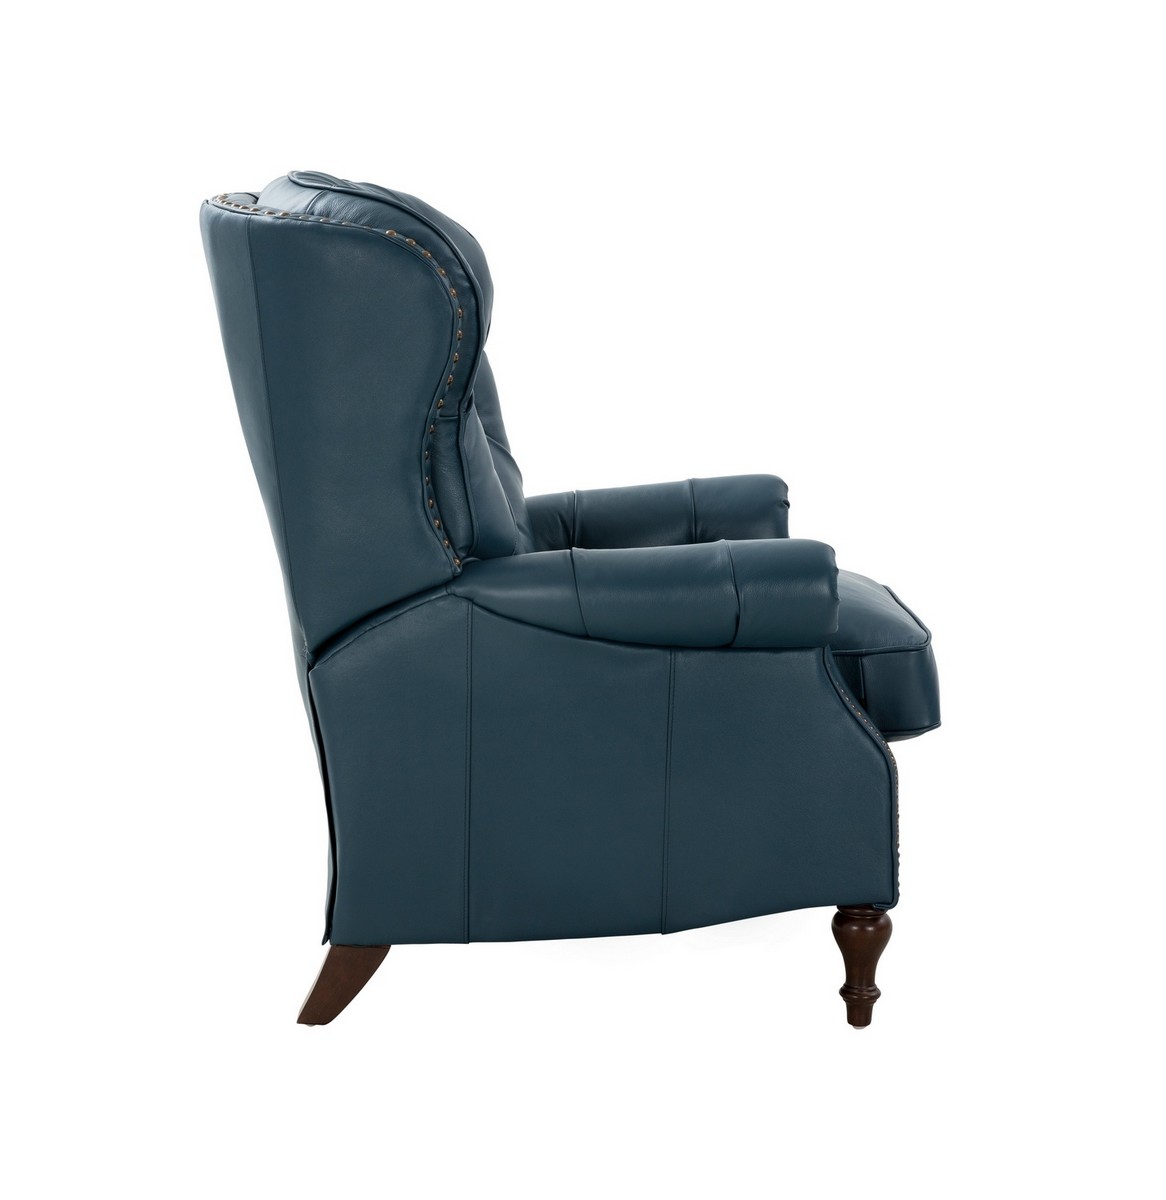 Barcalounger Kendall Recliner Chair - Prestin Yale Blue/All Leather